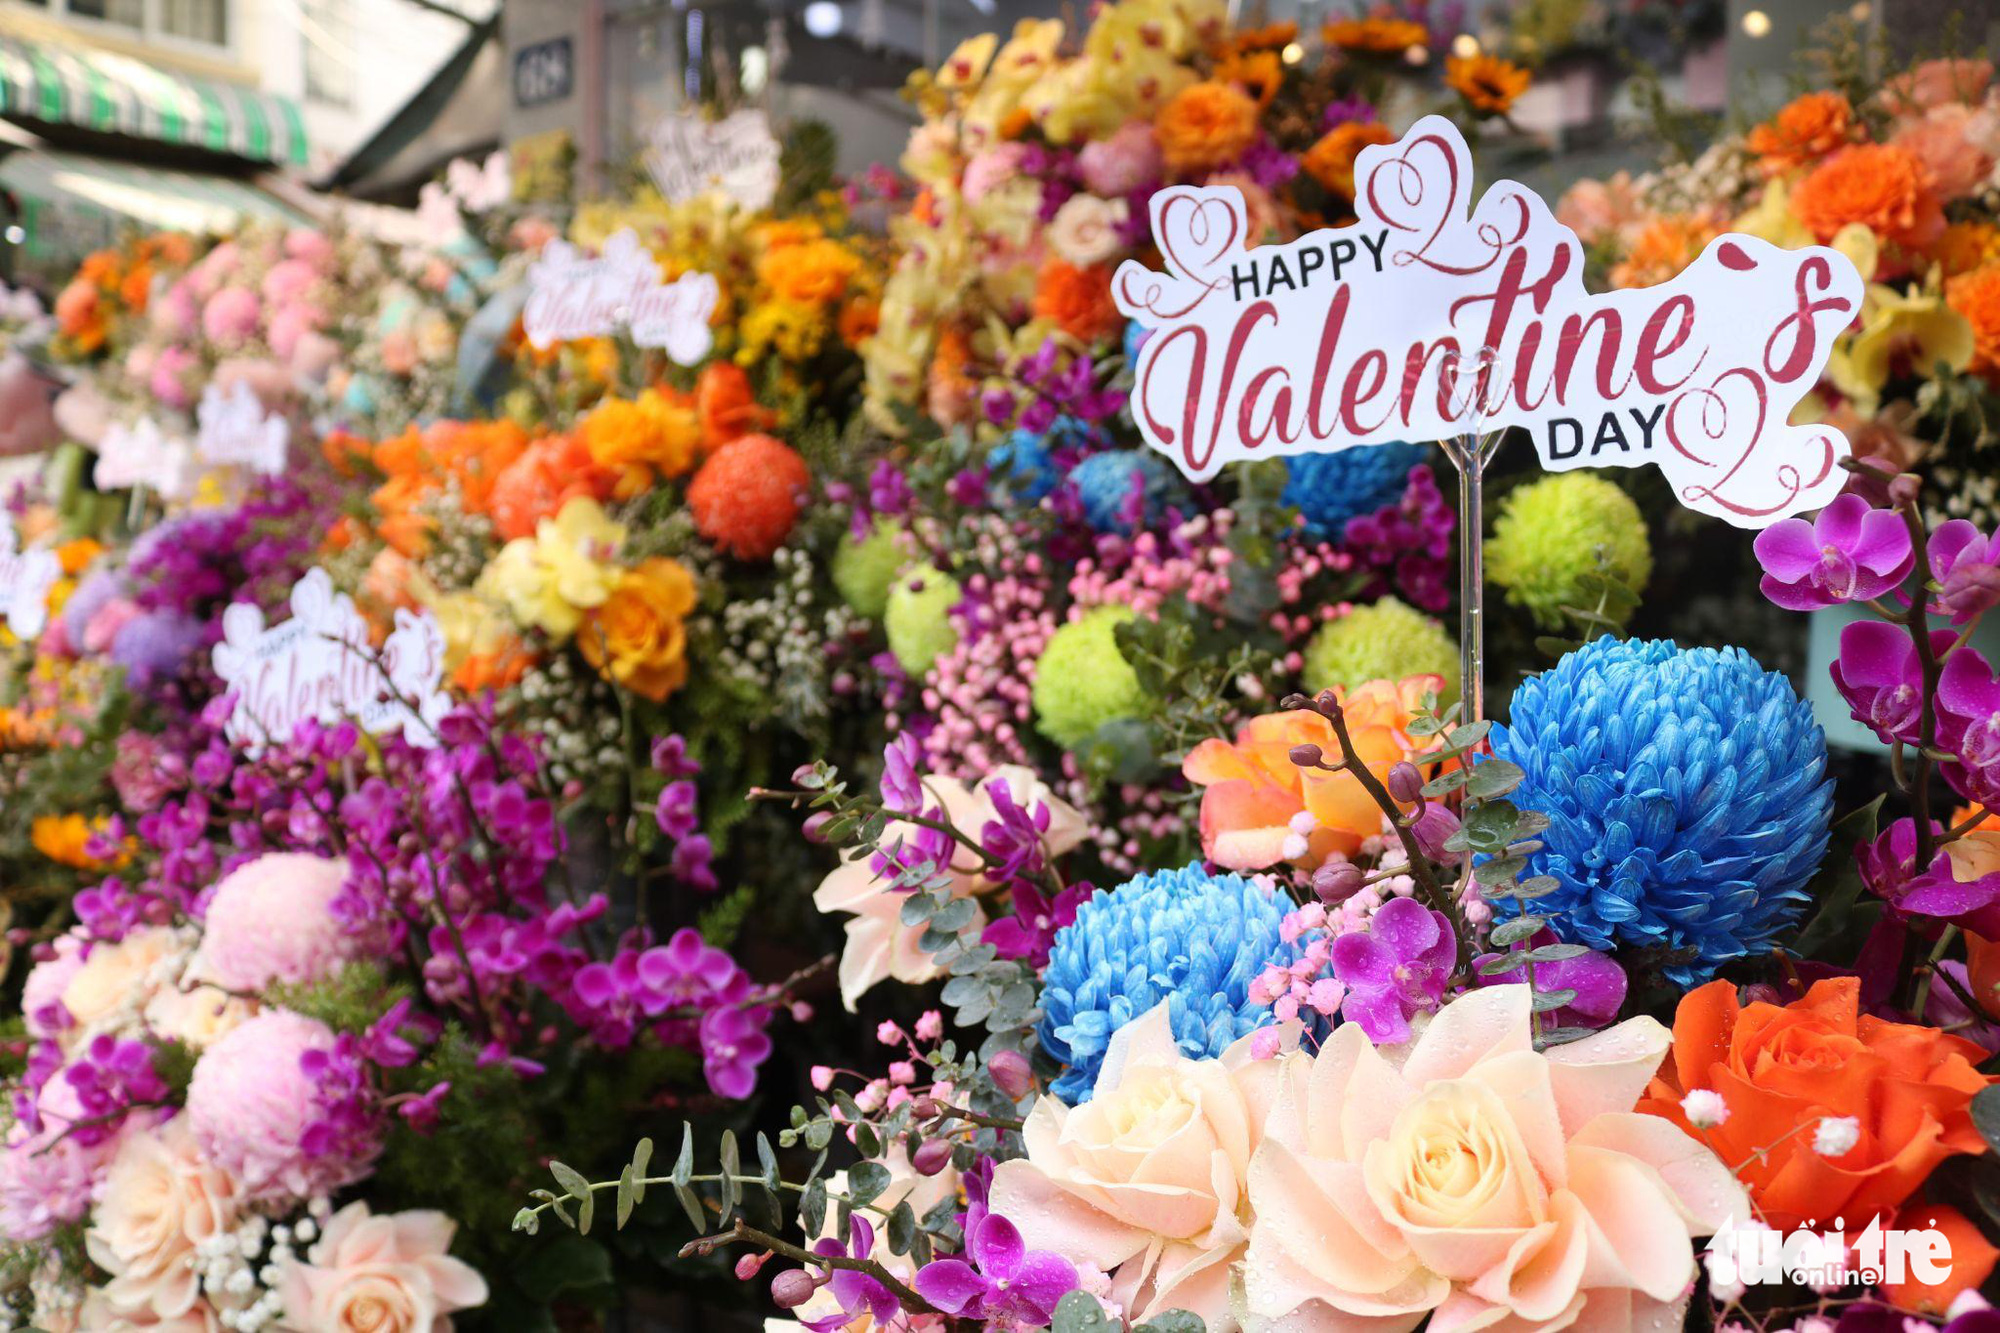 Valentine’s Day flowers are sold at Ho Thi Ky flower market in District 10, Ho Chi Minh City. Photo: Vien Vy / Tuoi Tre